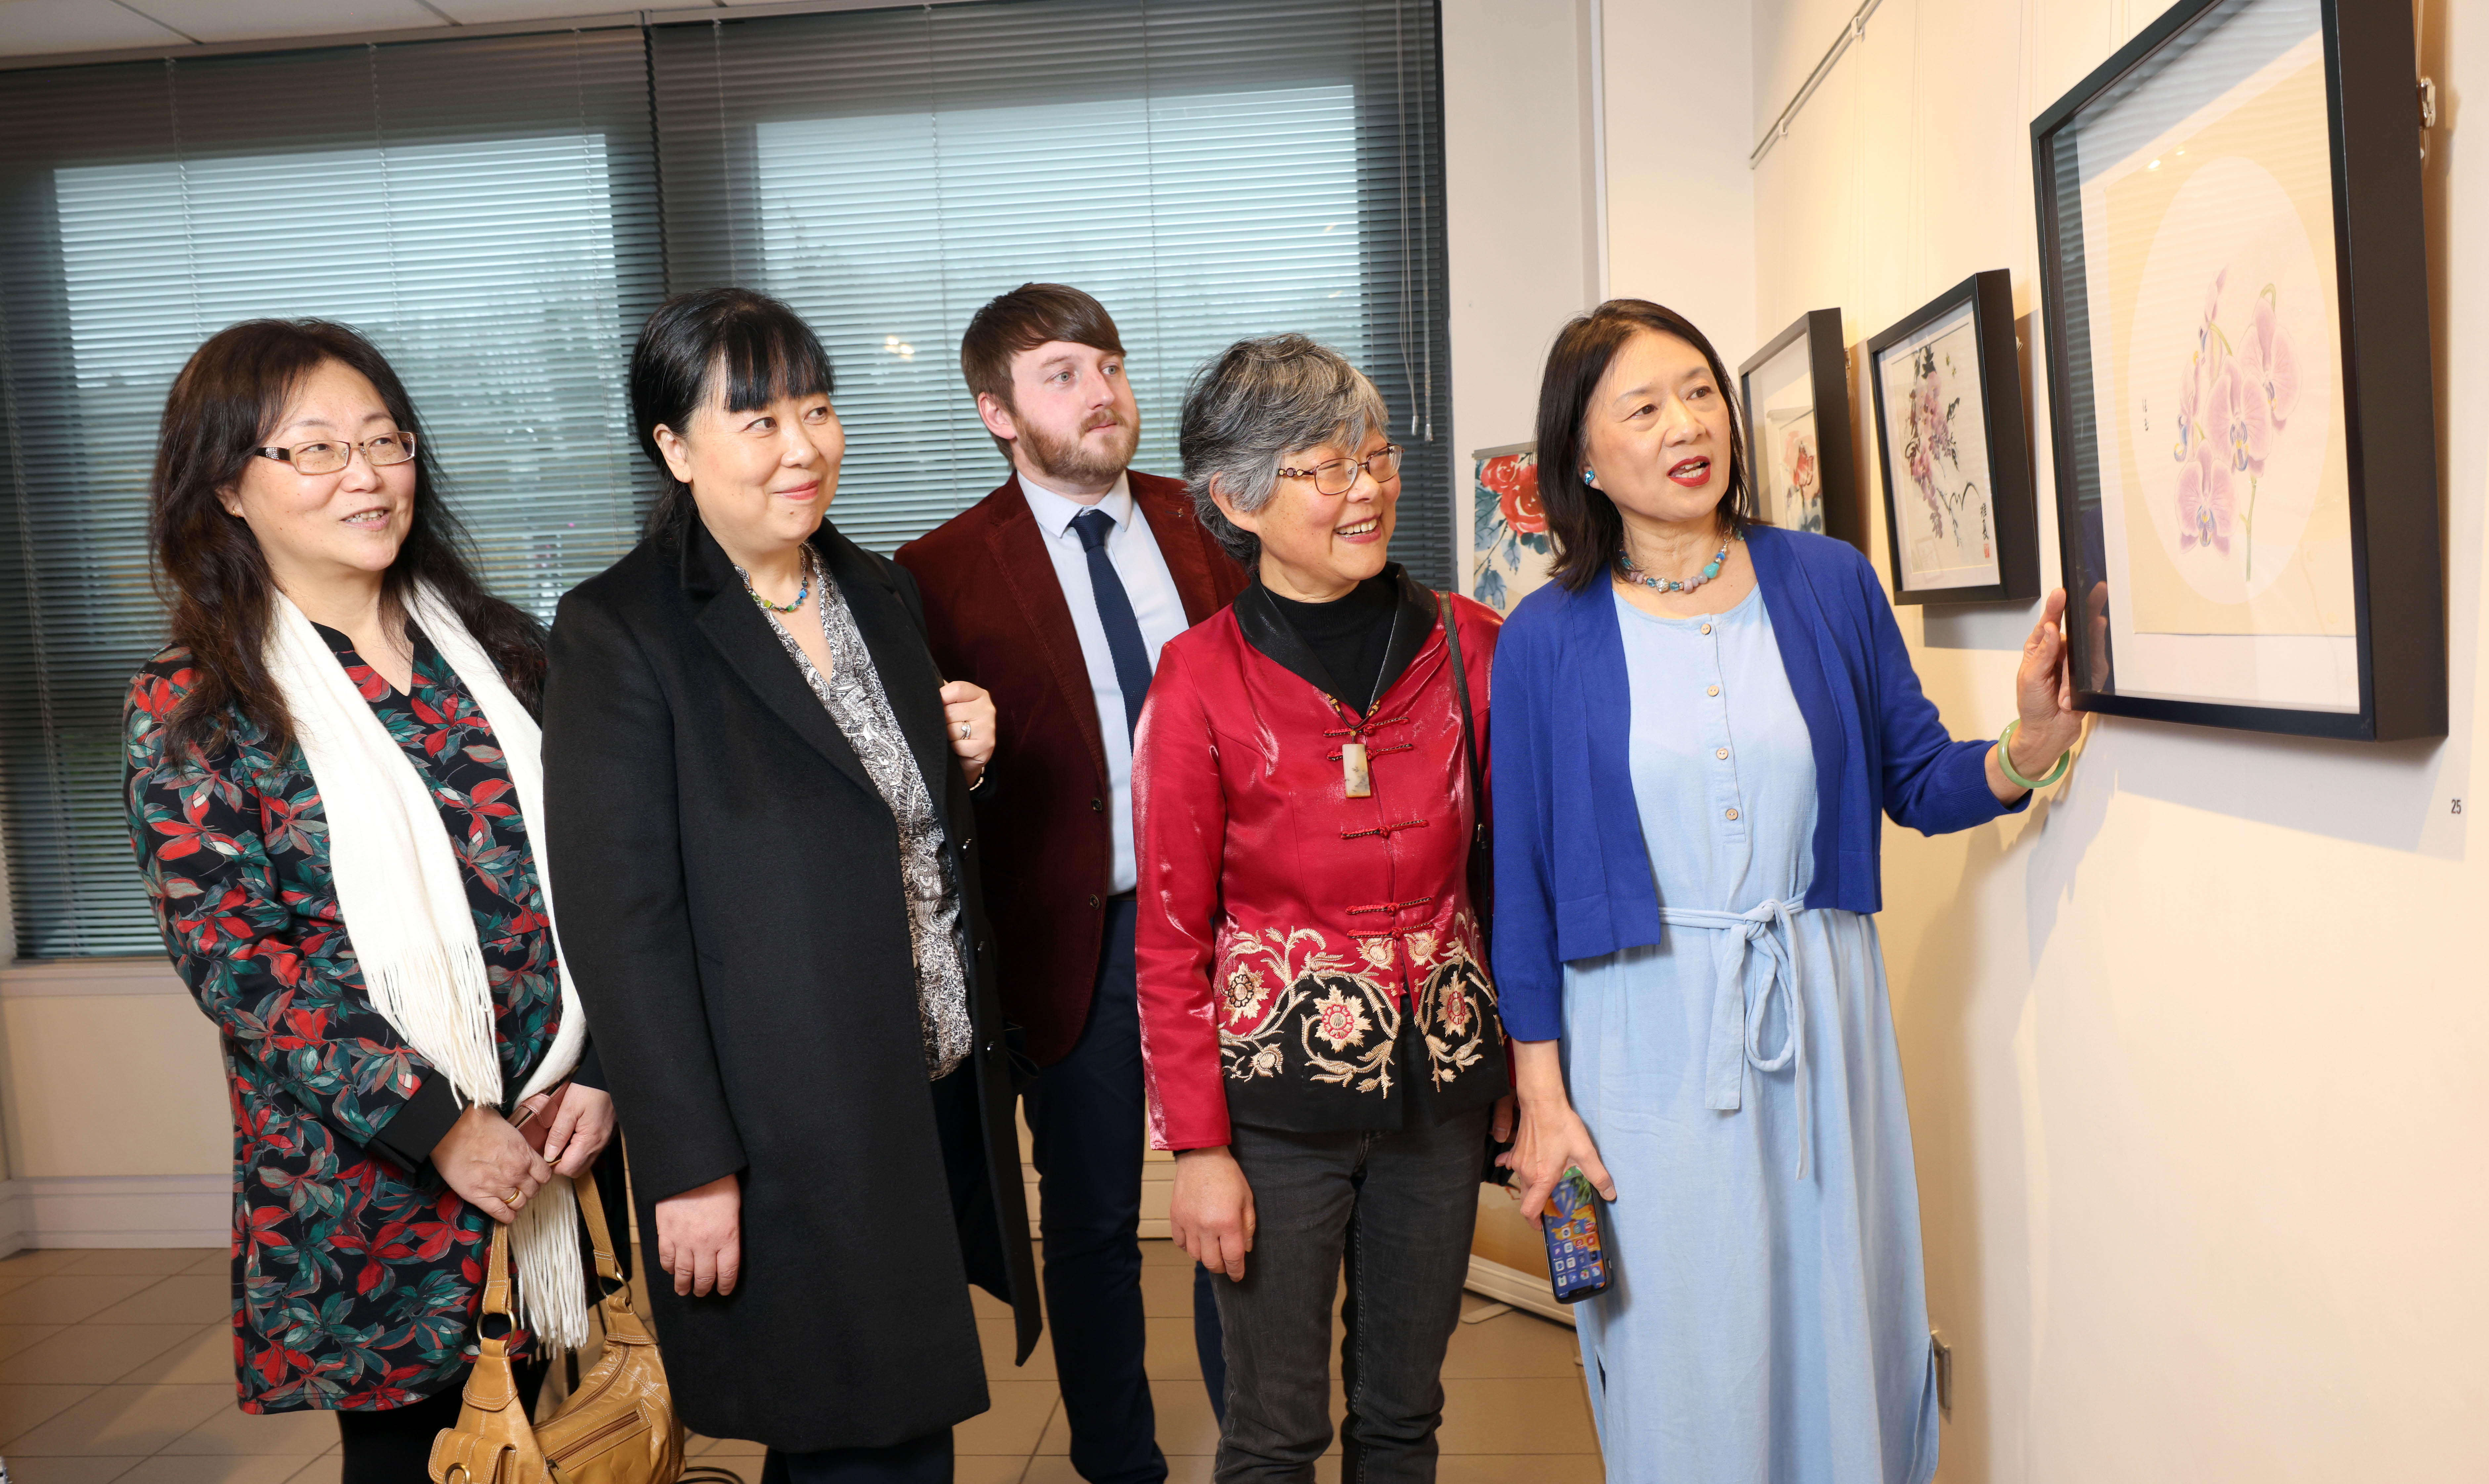 A celebration of Chinese art and culture took place at ISLAND Arts Centre this weekend for the opening of the ArtEast exhibition ‘East-West Magic Brush’